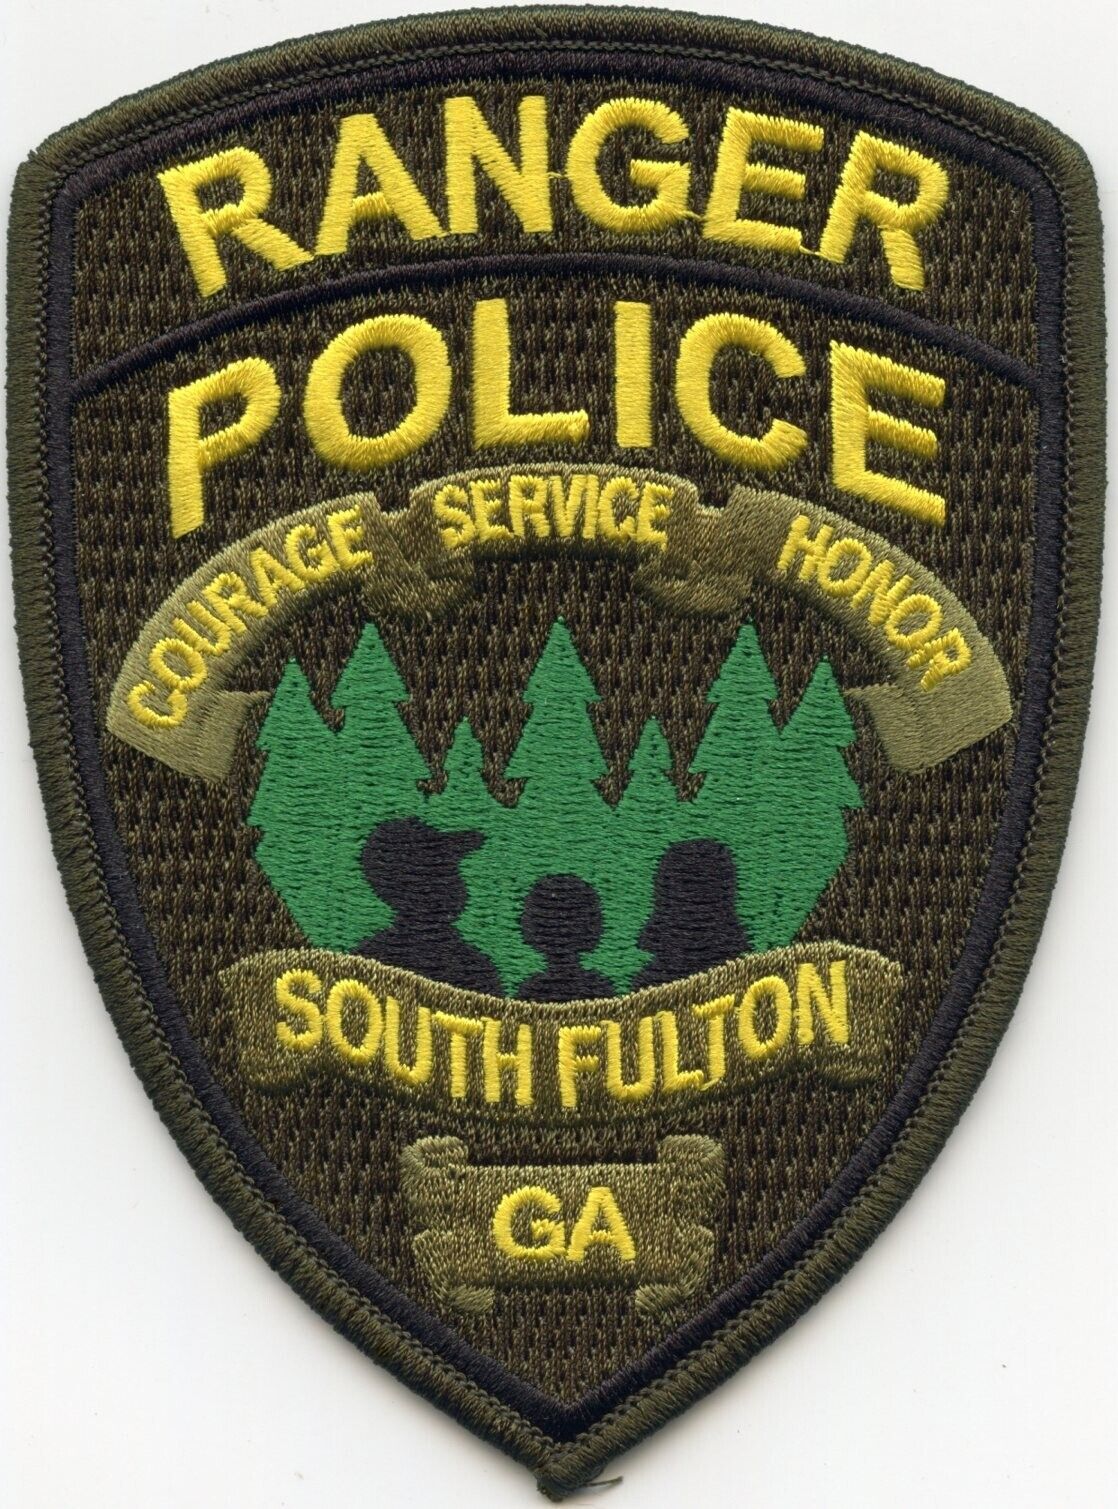 SOUTH FULTON GEORGIA full color PARK RANGER POLICE PATCH